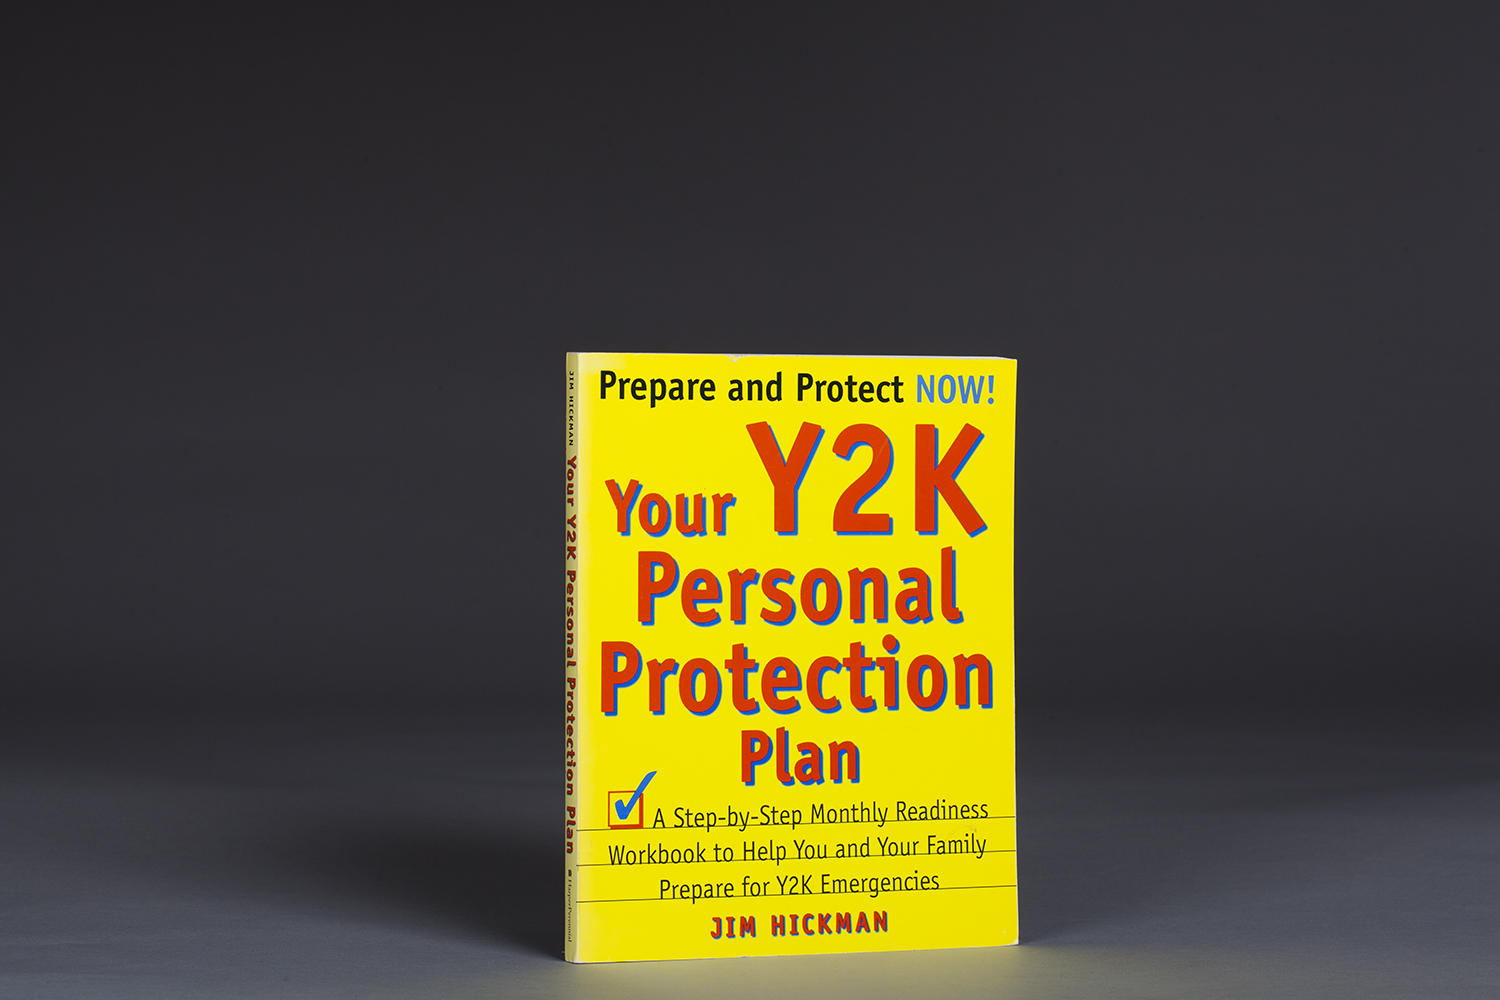 Your Y2K Personal Protection Plan - 9758 Cover.jpg